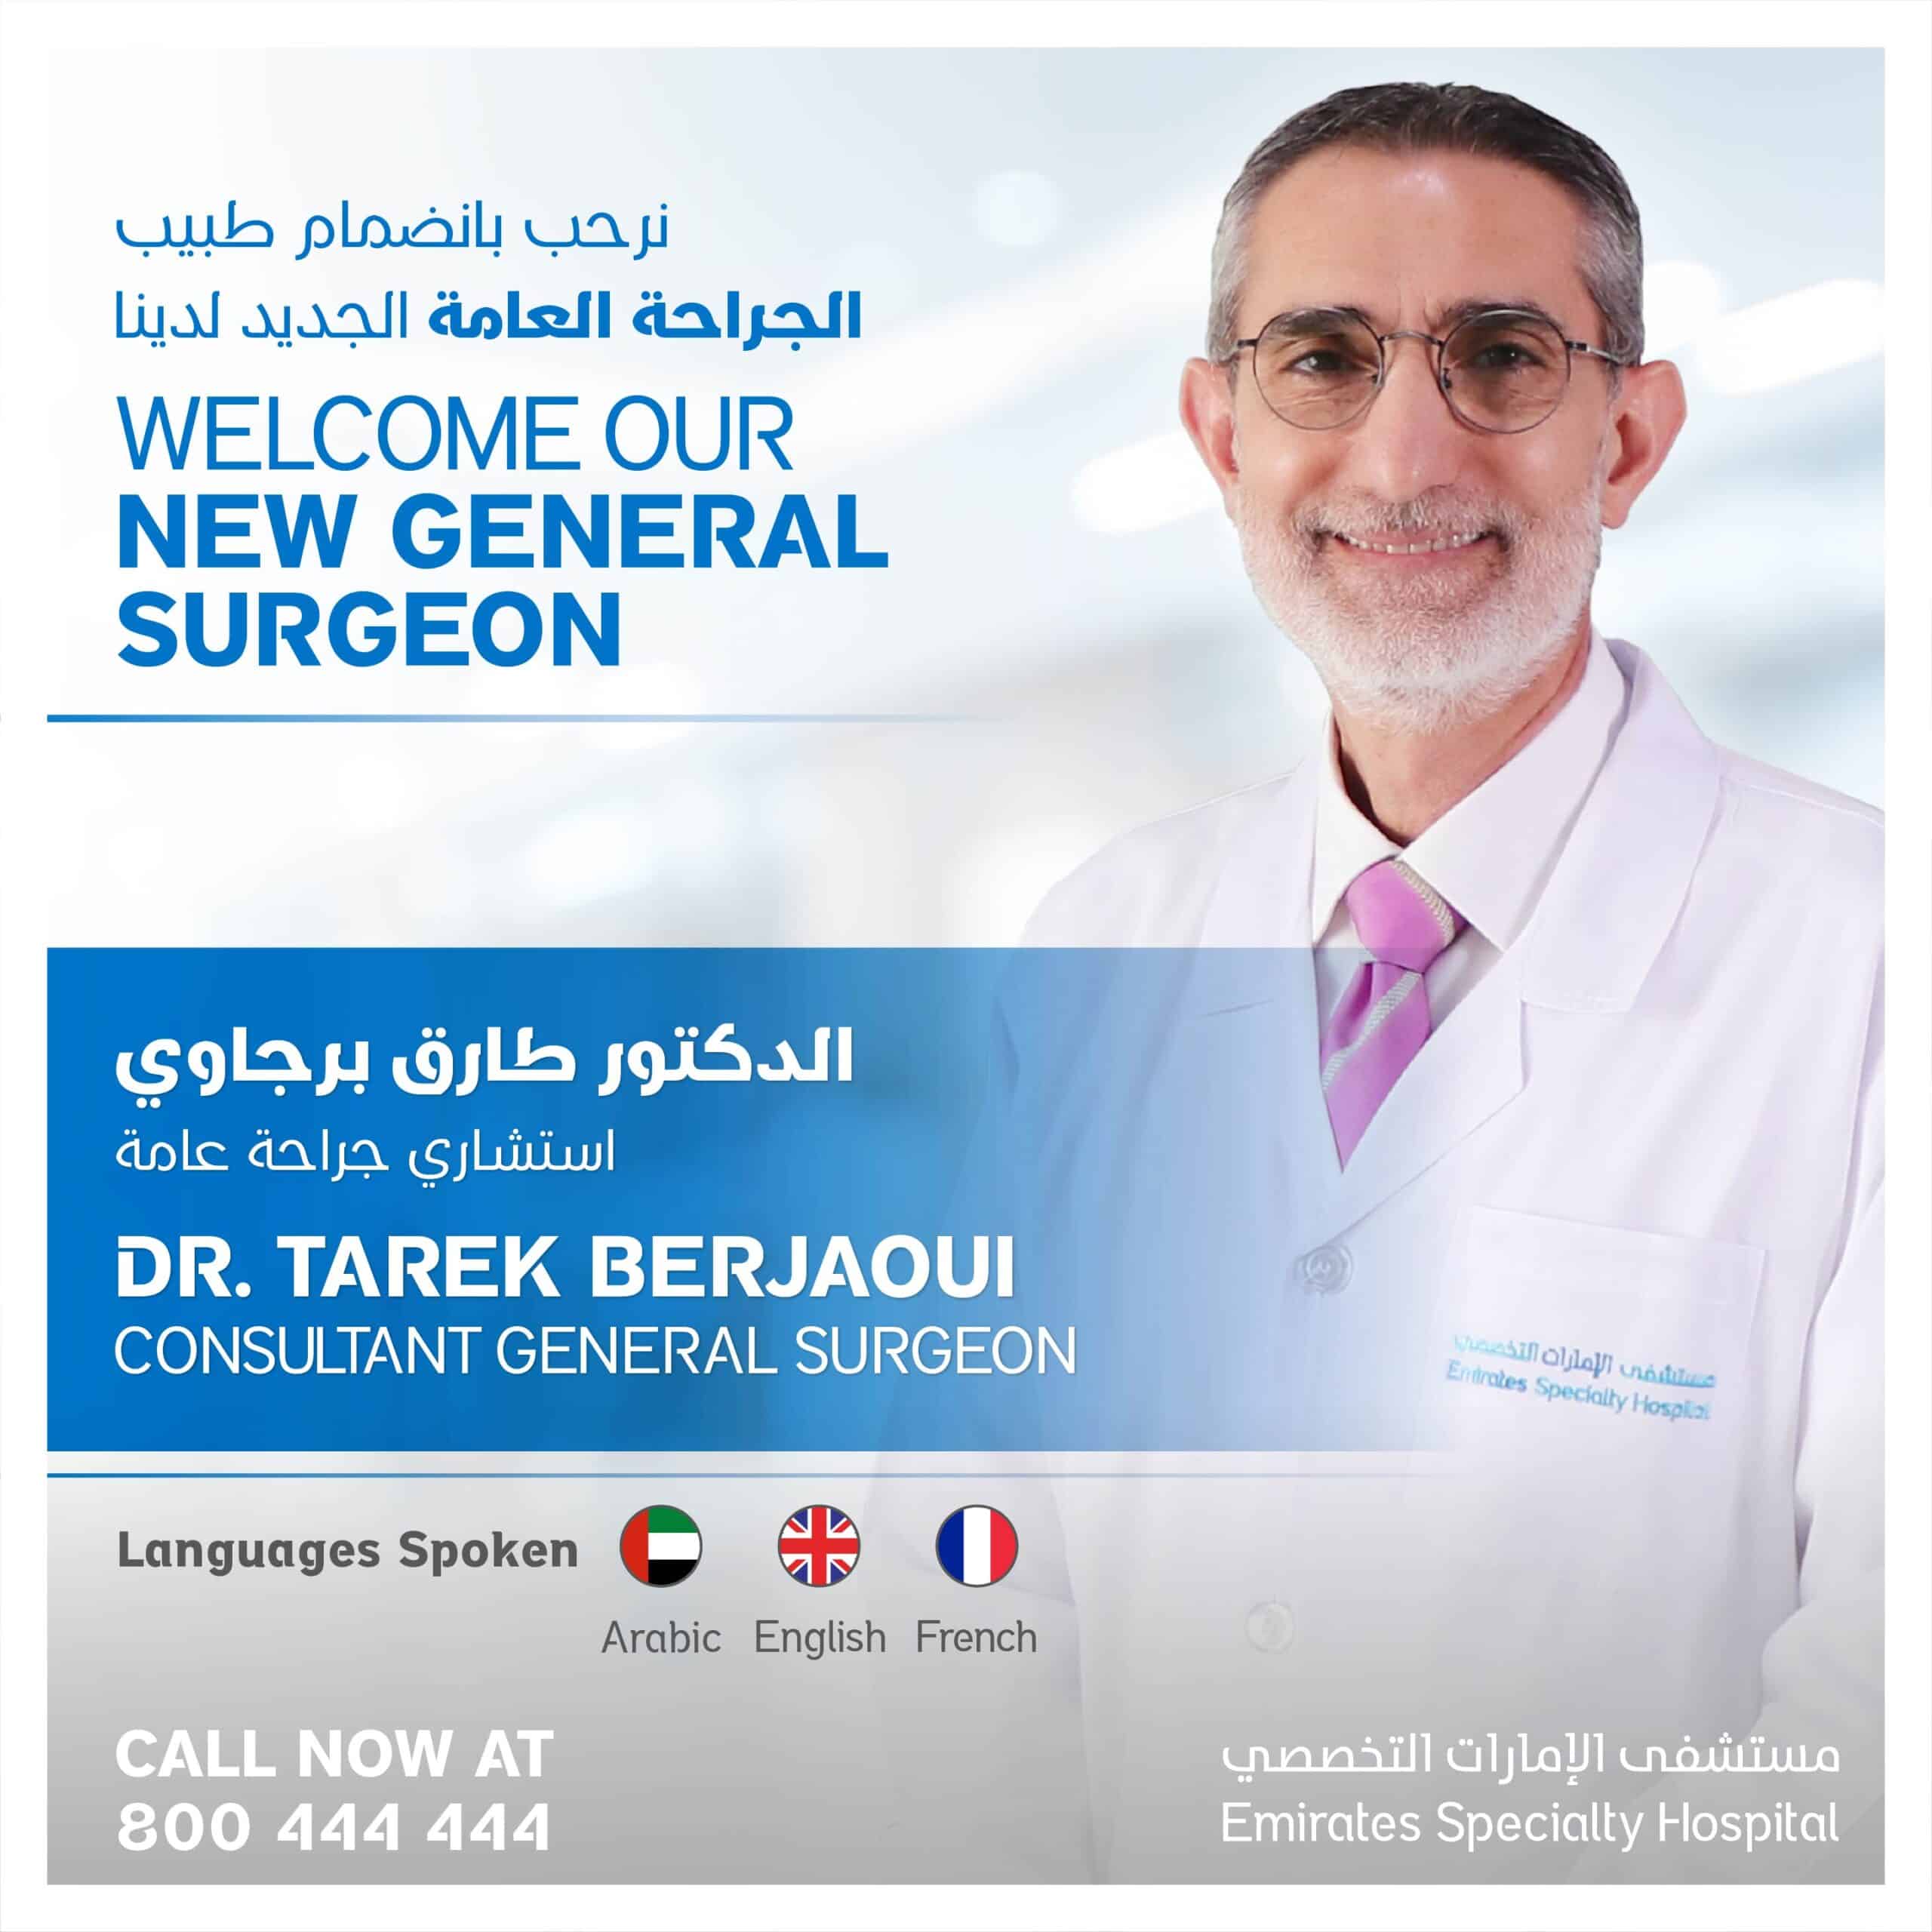 Dr. Tarek Berjaoui, Consultant General Surgeon Joined to Emirates Specialty Hospital - DHCC